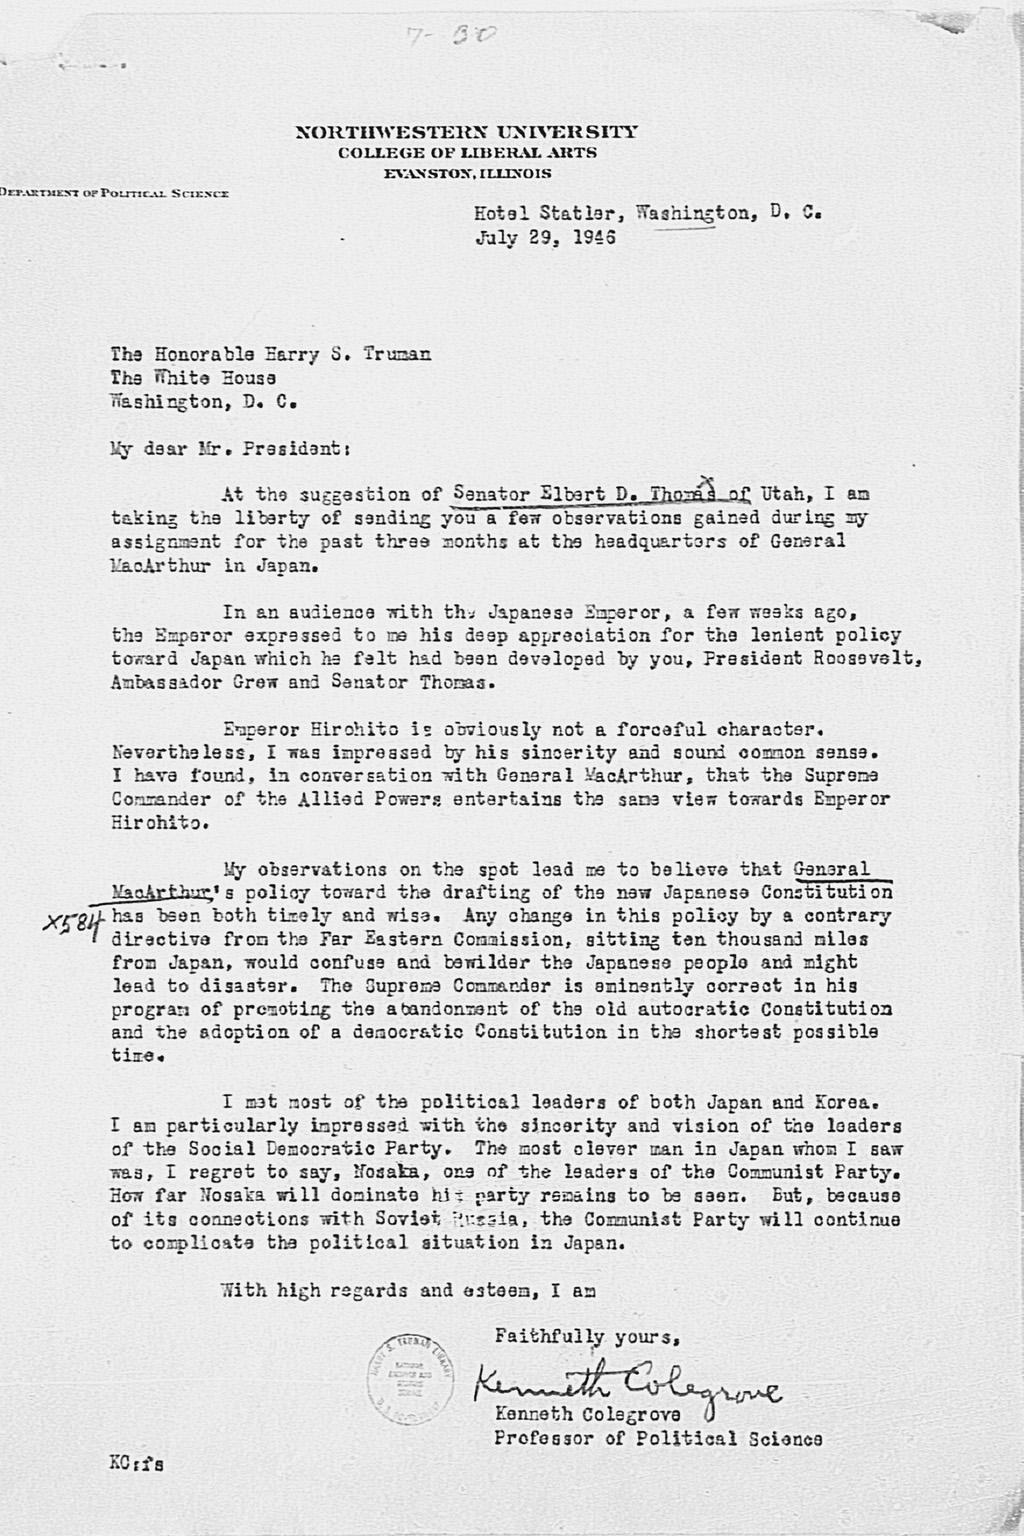 [Letter from Kenneth Colegrove to President Harry S. Truman, dated July 29, 1946](Larger image)